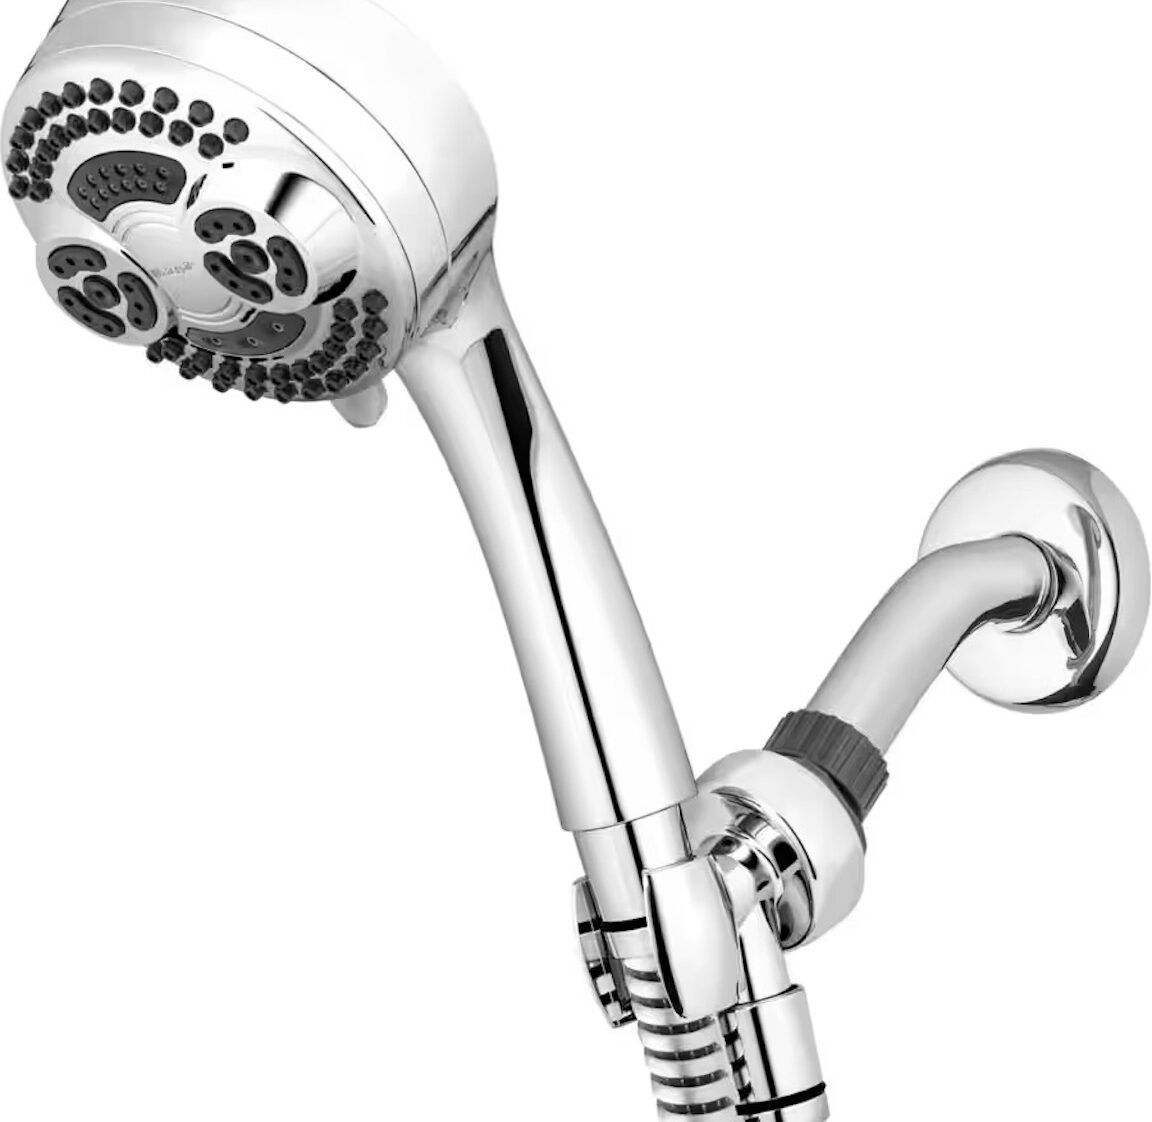 How to Remove a Shower Head Flow Restrictor